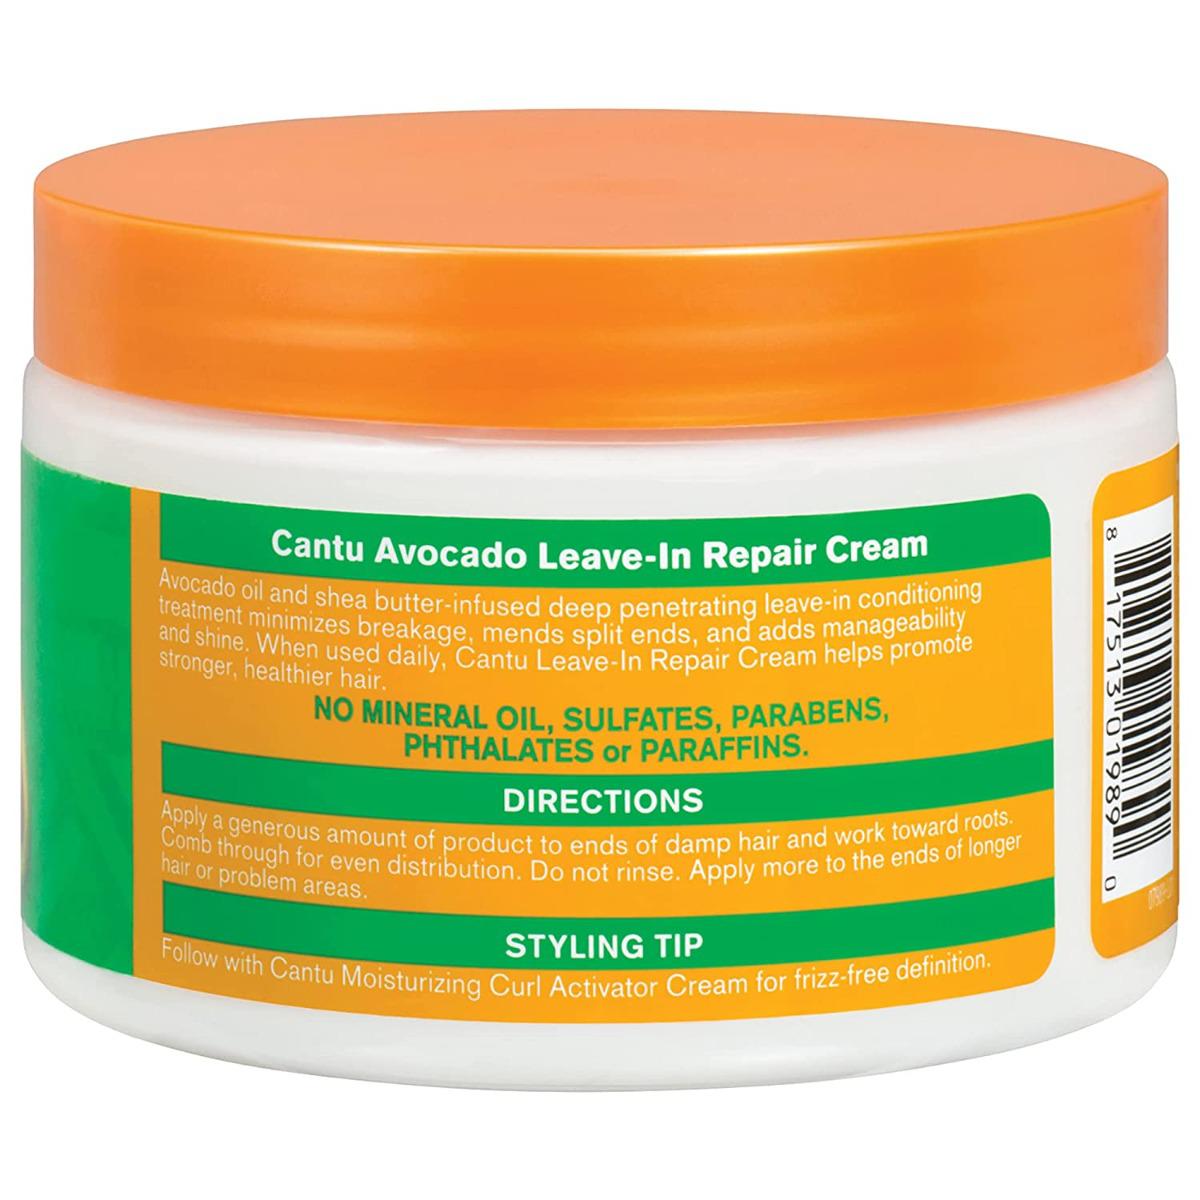 Cantu Avocado Hydrating Repair Leave-In with Olive Oil, Aloe & Shea Butter 340g